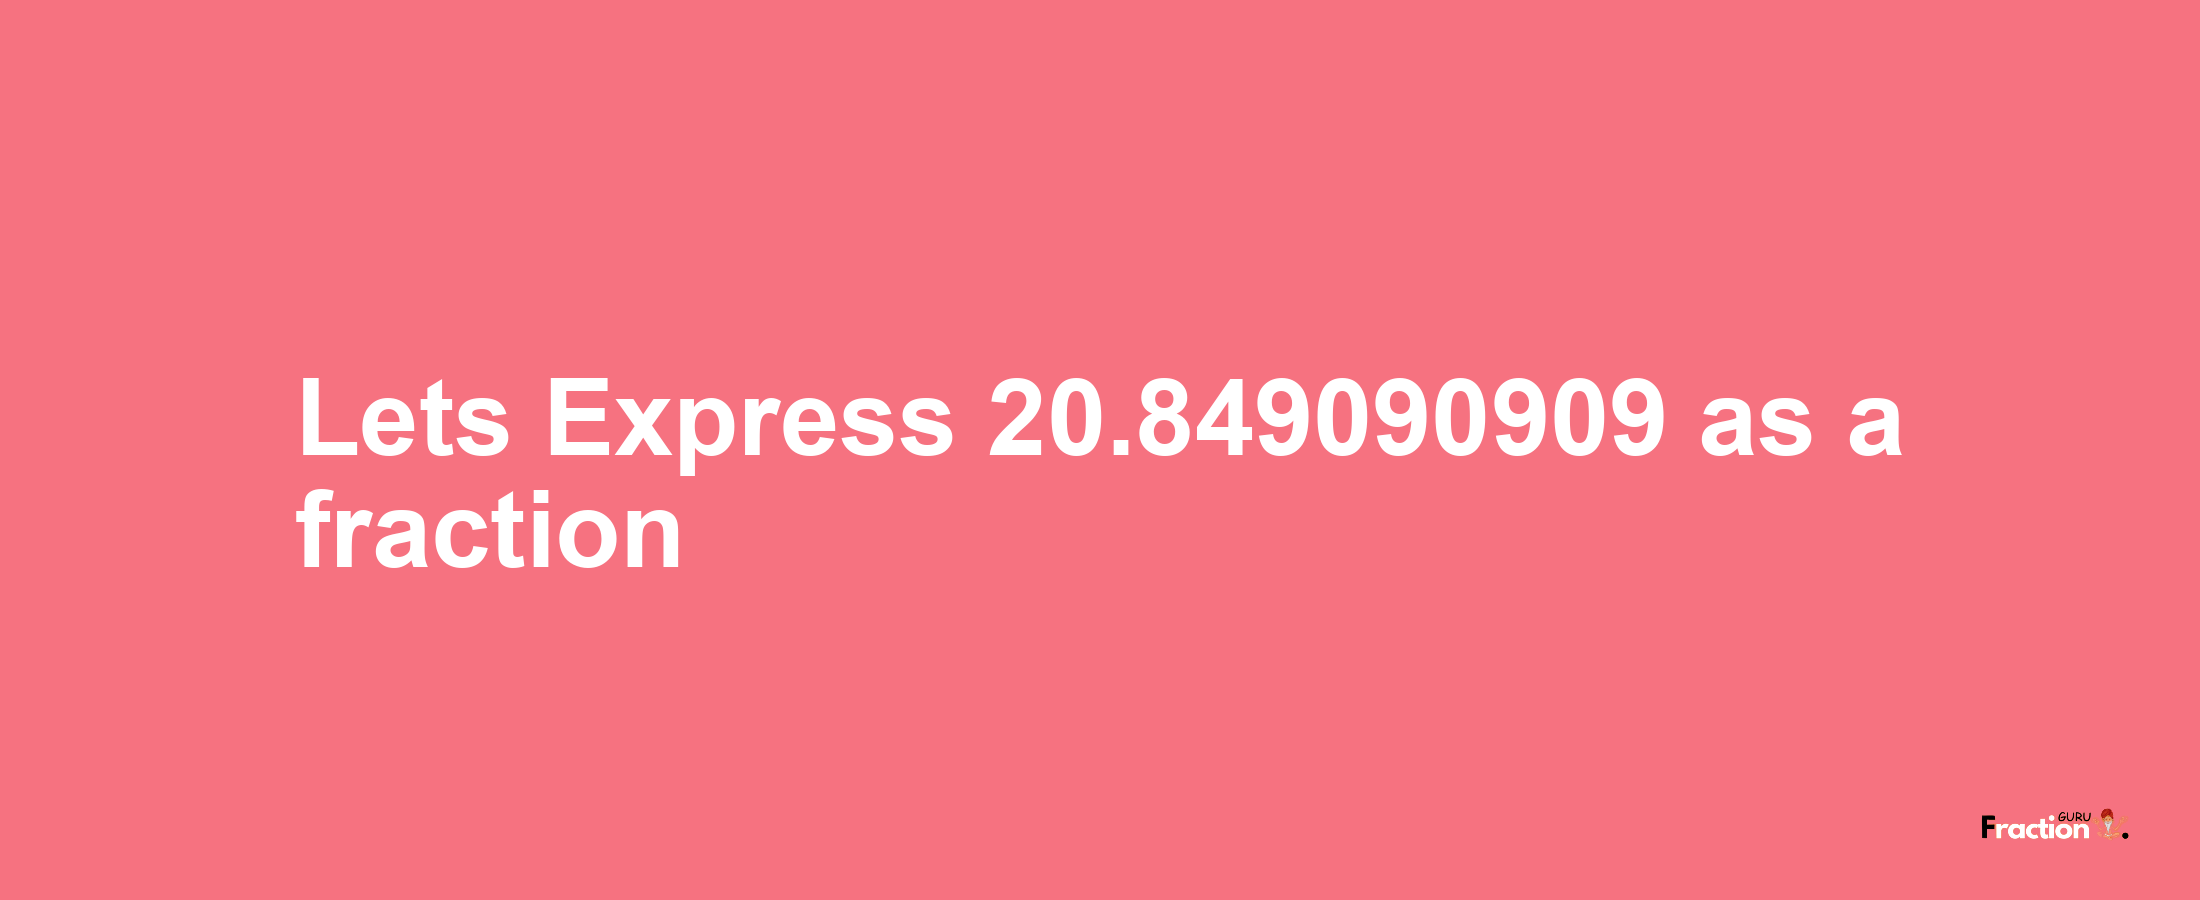 Lets Express 20.849090909 as afraction